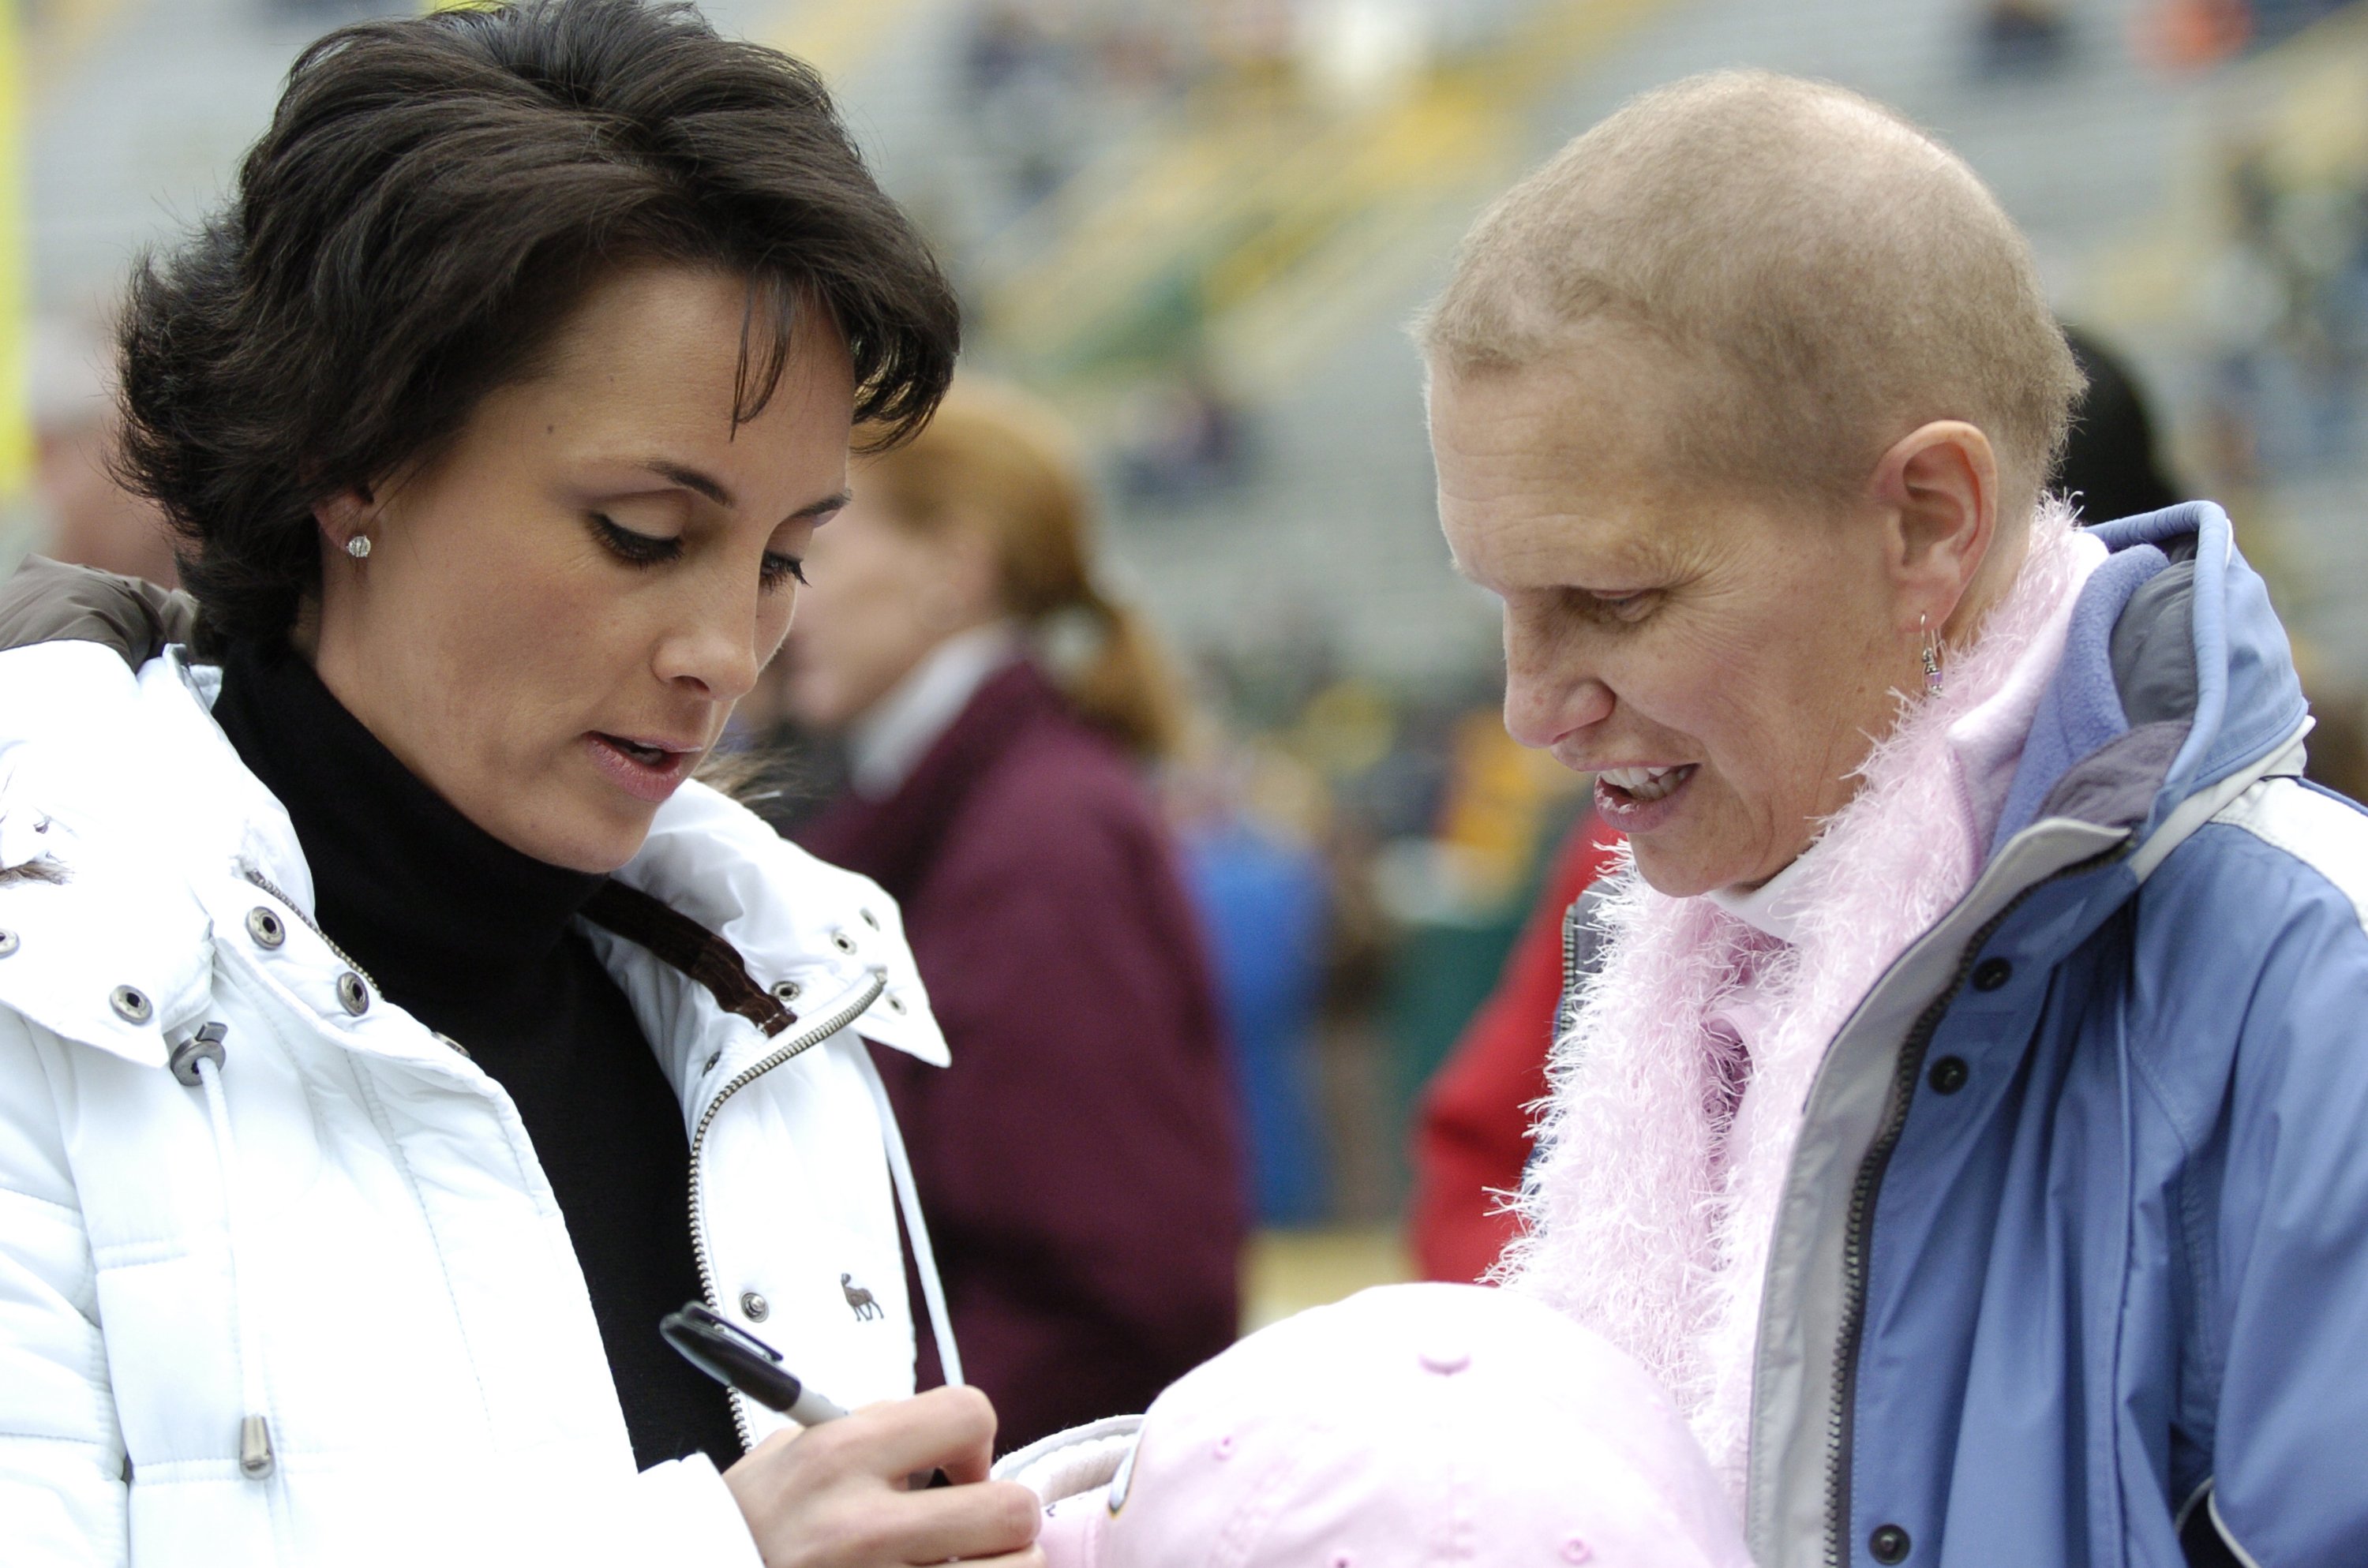 Deanna Favre signs the hat of another cancer survivor before the start of a Green Bay Packer - Seattle Seahawks game in 2006. | Source: Getty Images